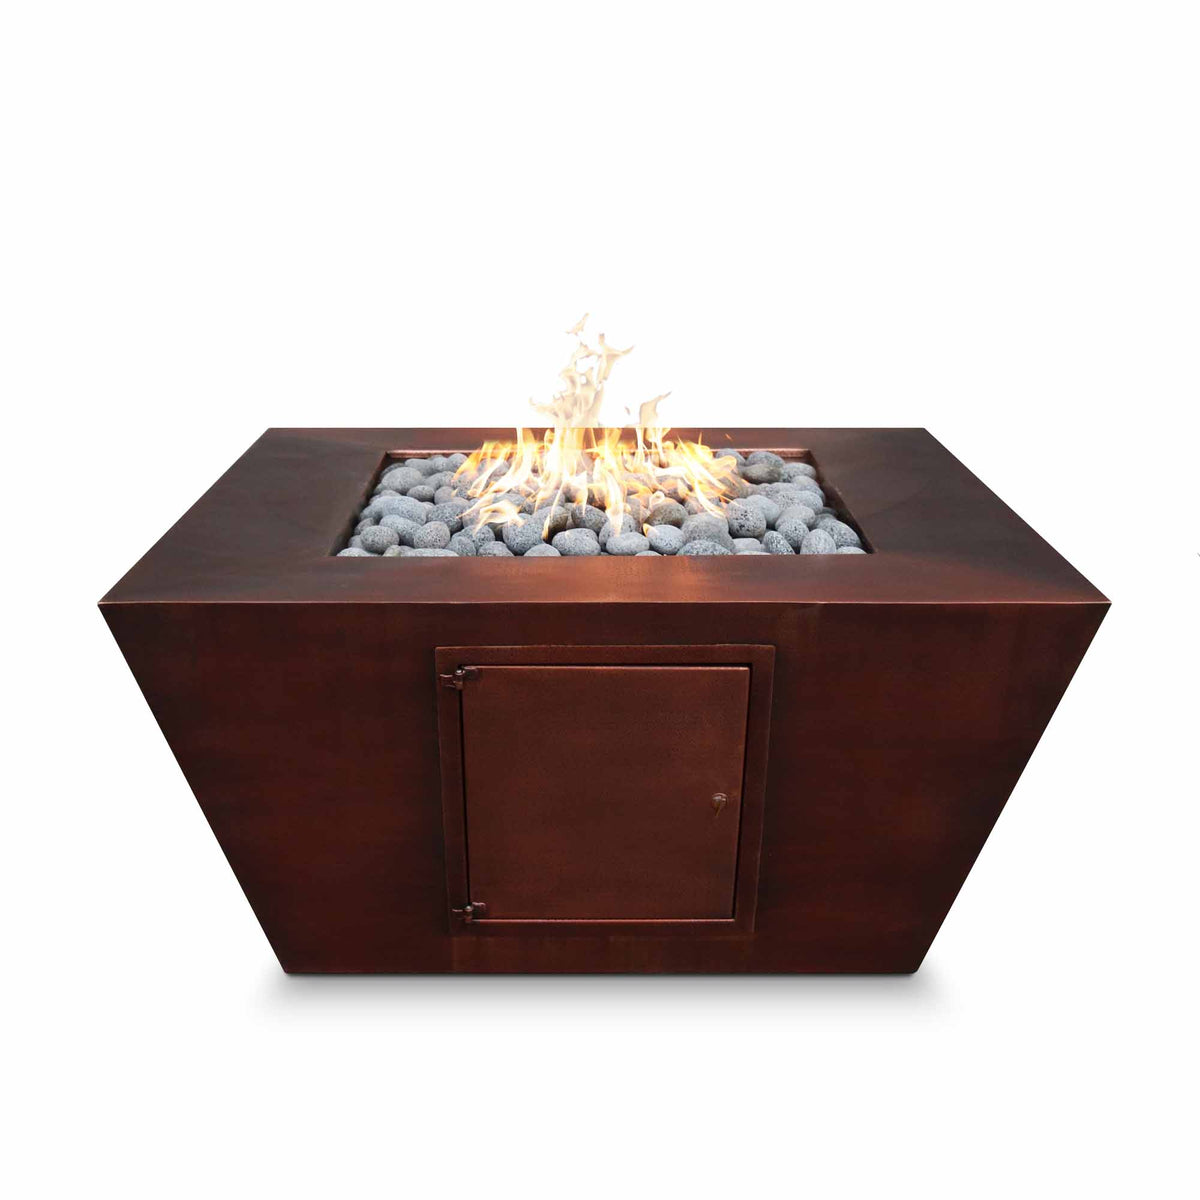 The Outdoor Plus - Redan Fire Pit - Powder Coated Metal